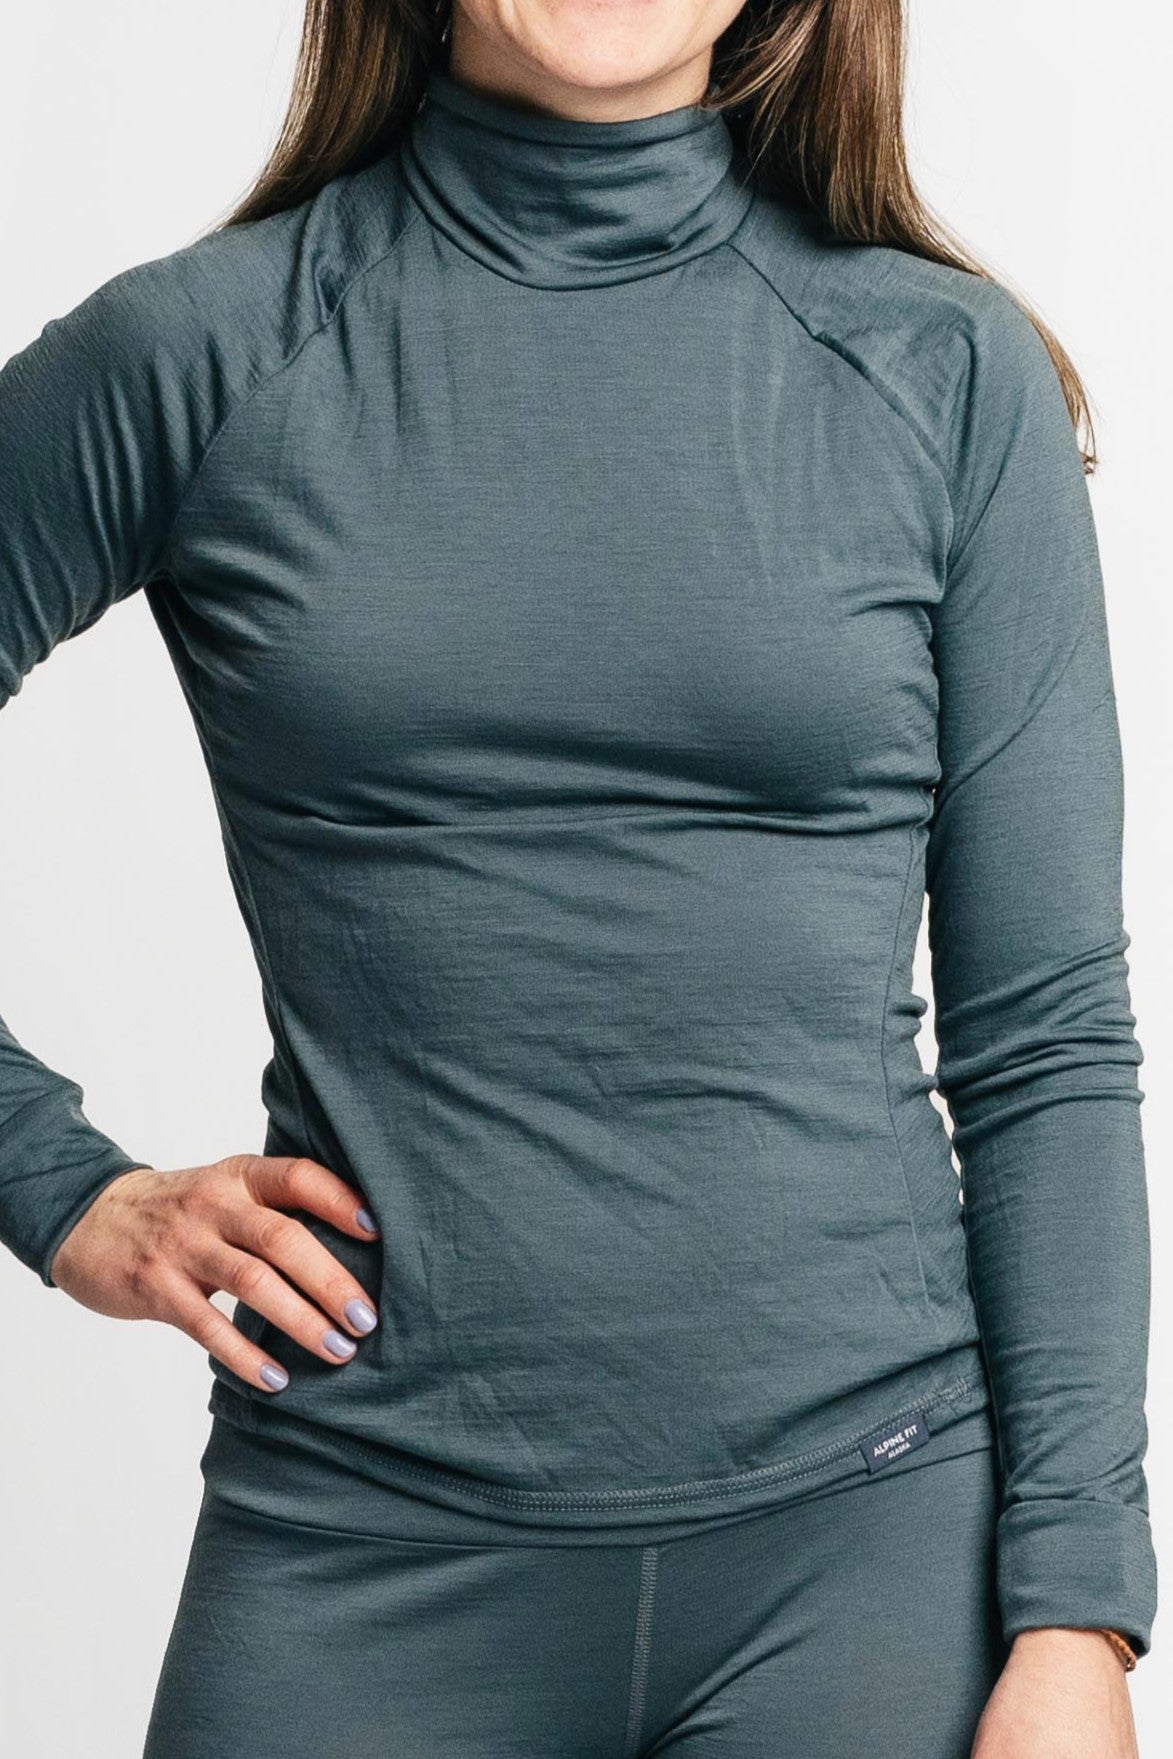 Merino Wool Thermal Base Layer: Warm, Warming & Breathable For